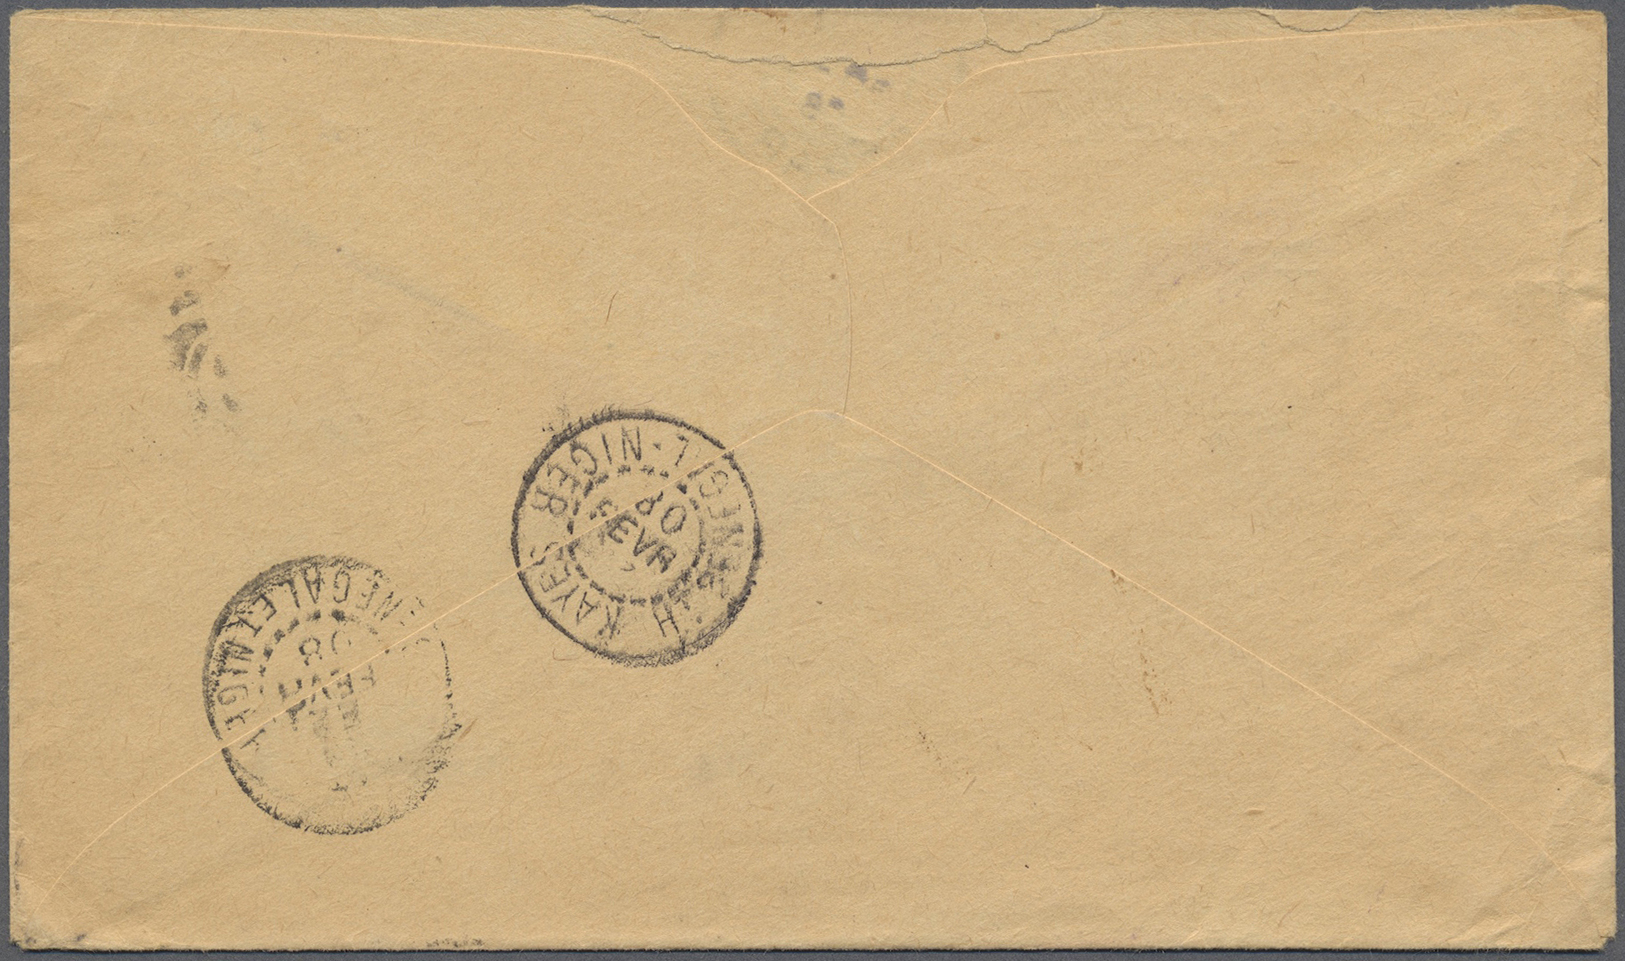 Br Französisch-Sudan: 1908. Envelope (flap Partly Missing, Stains) Addressed To Kati, Soudan Français Bearing United Sta - Covers & Documents